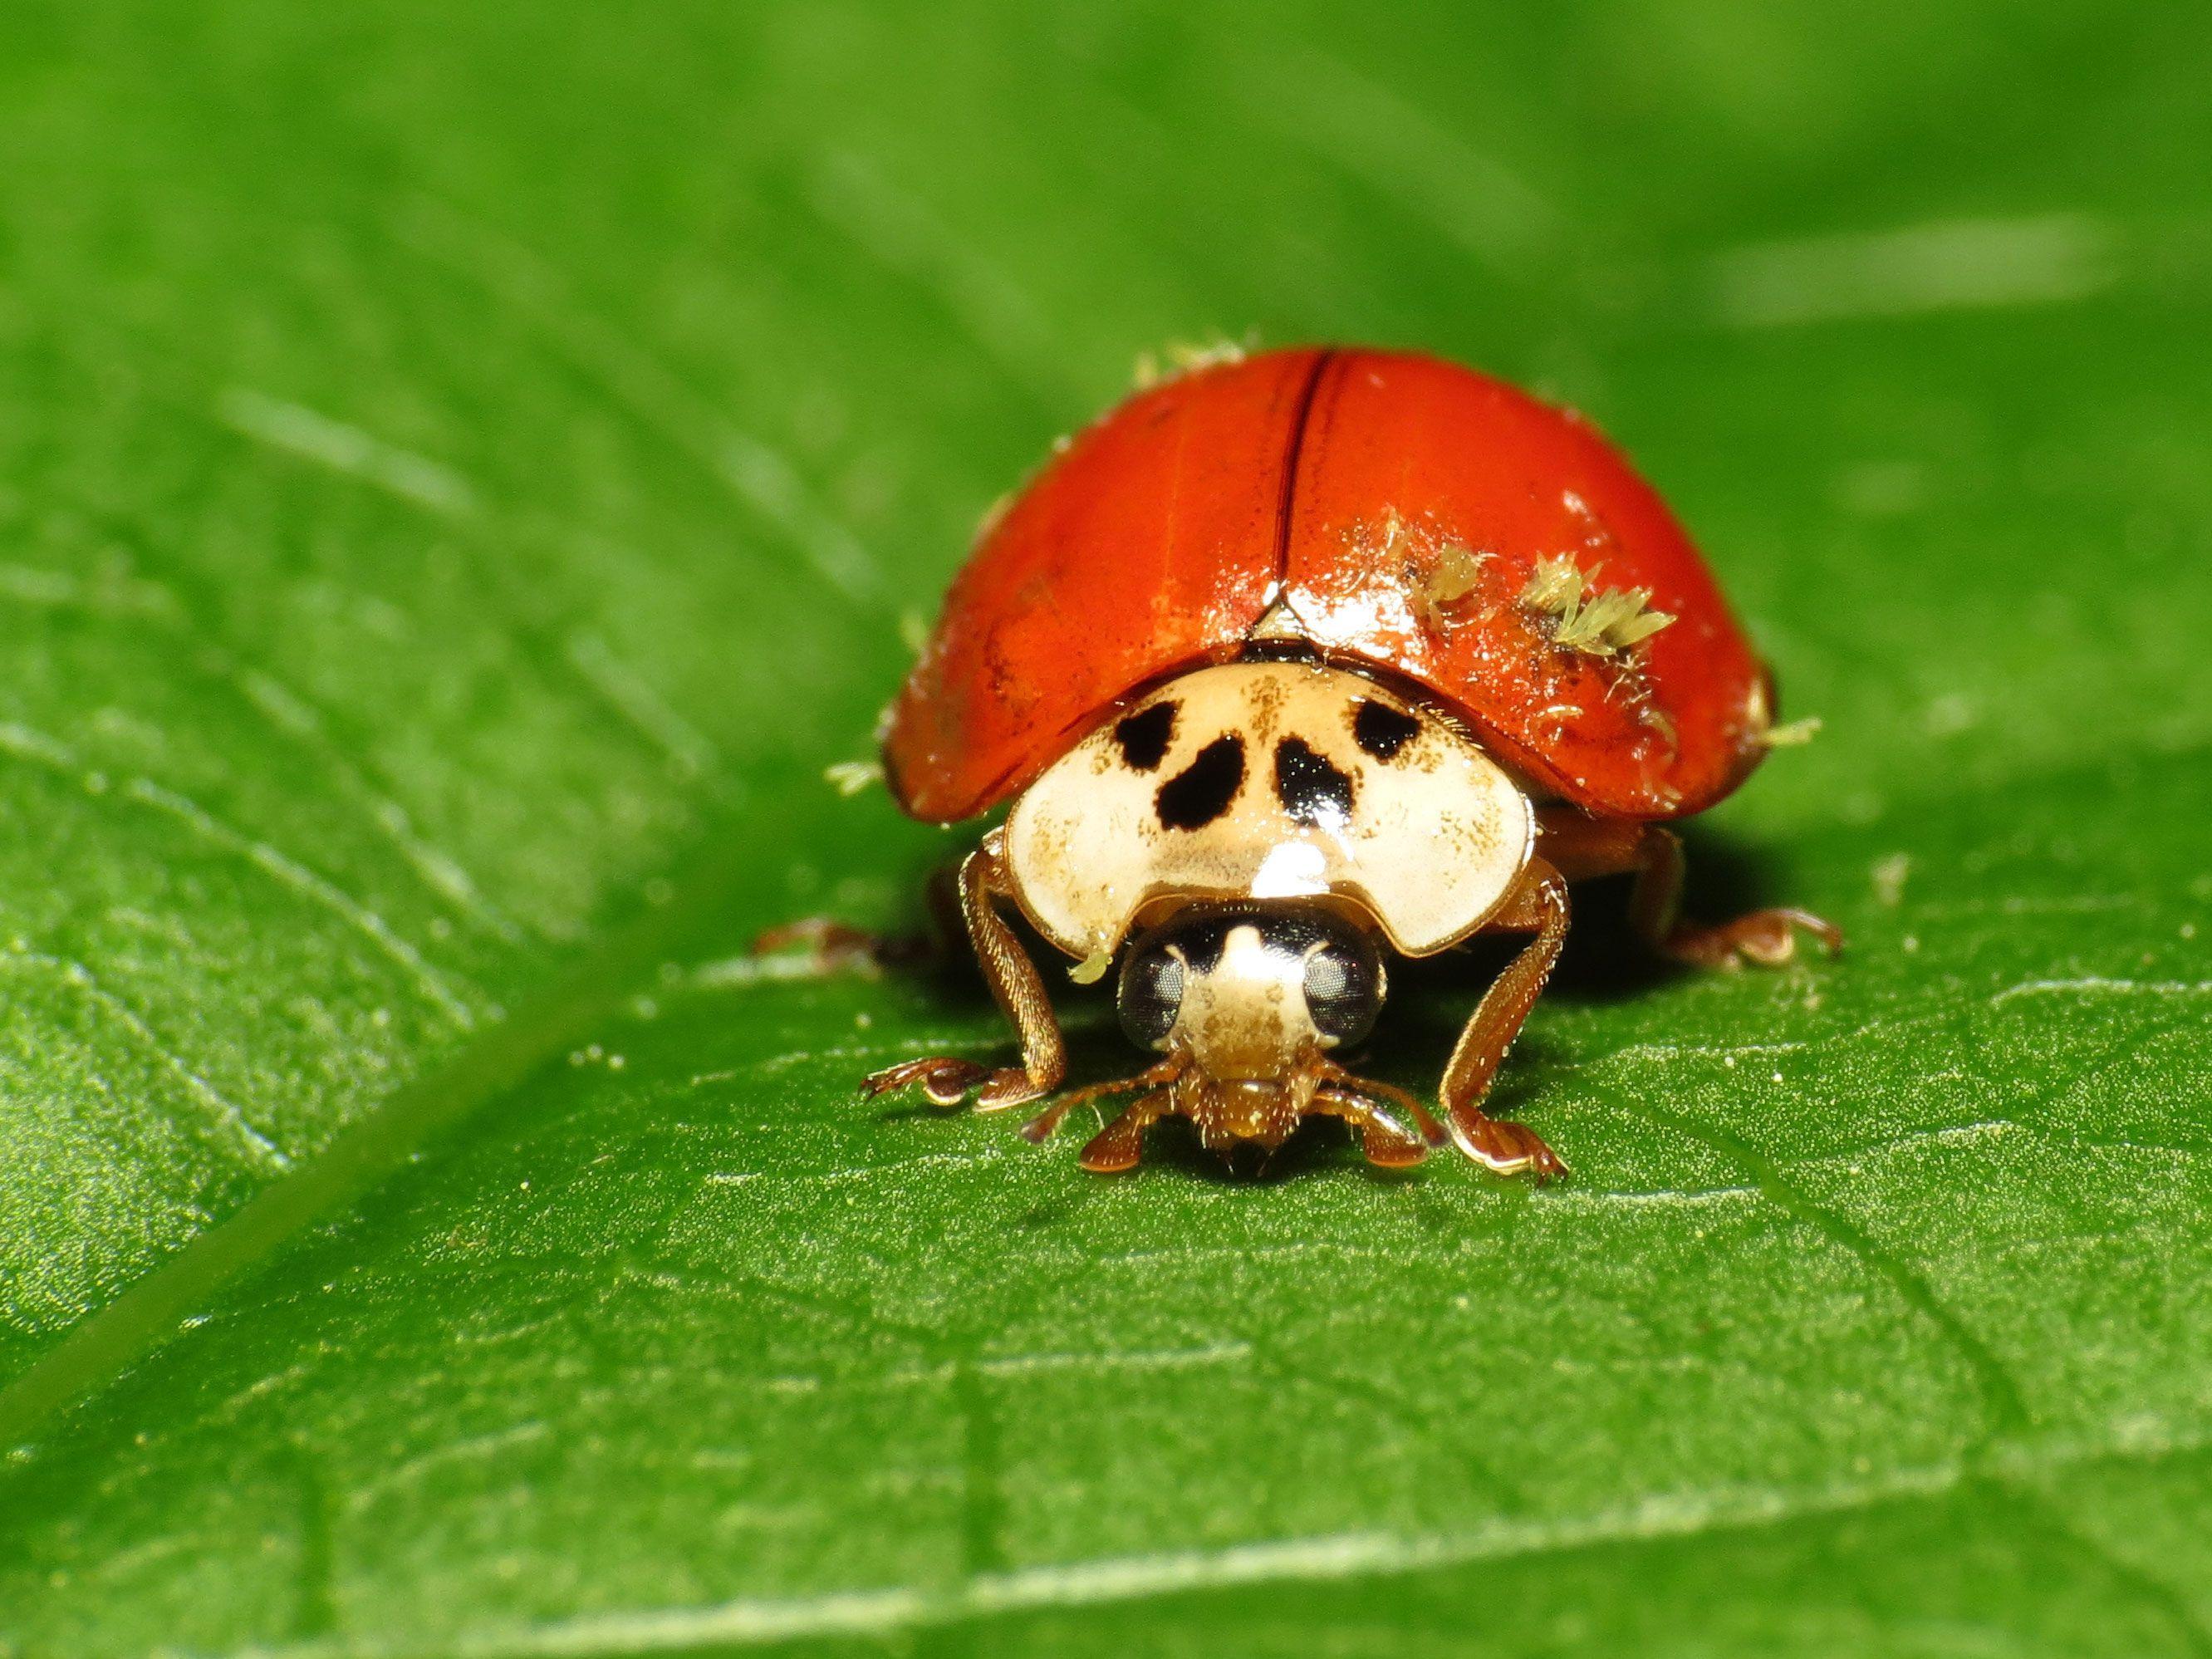 Asian lady beetle with fungus